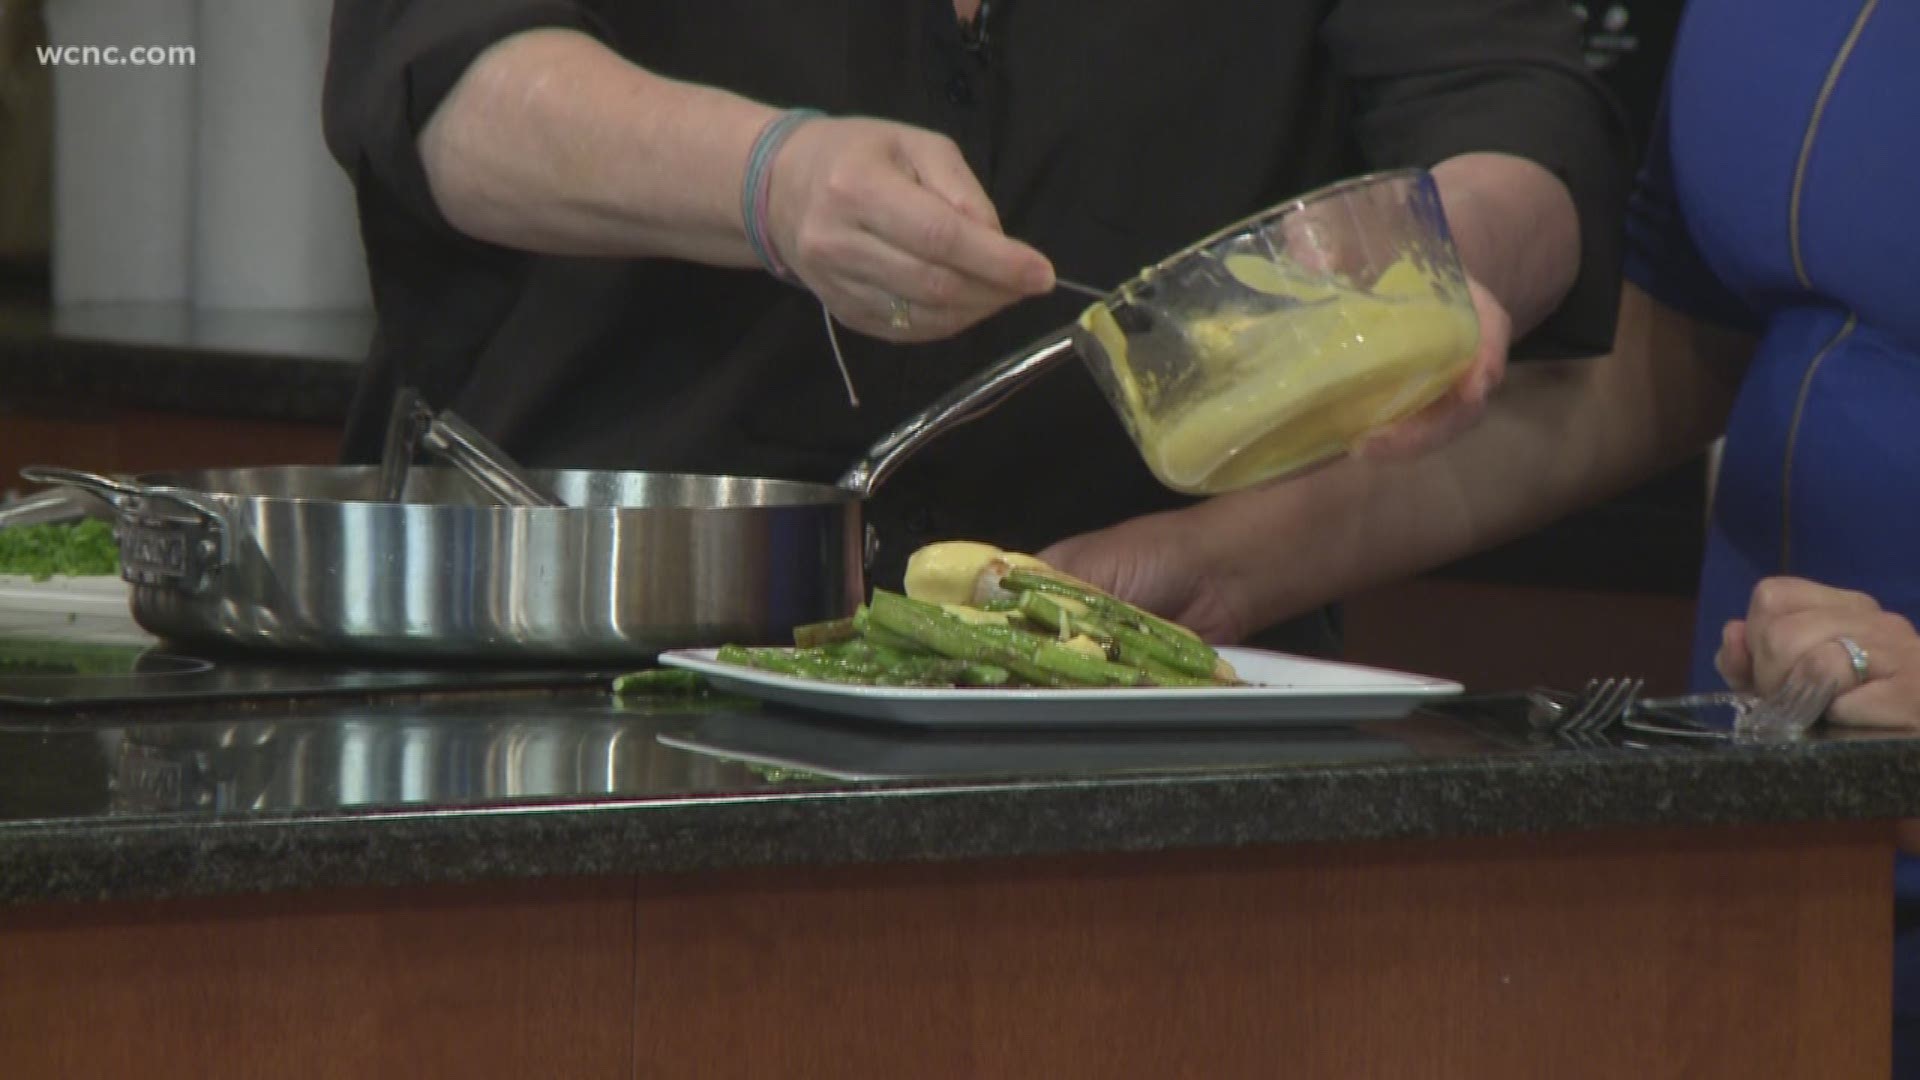 Chef Jenny is back and she is cooking up a quick chicken dish with hollandaise sauce.